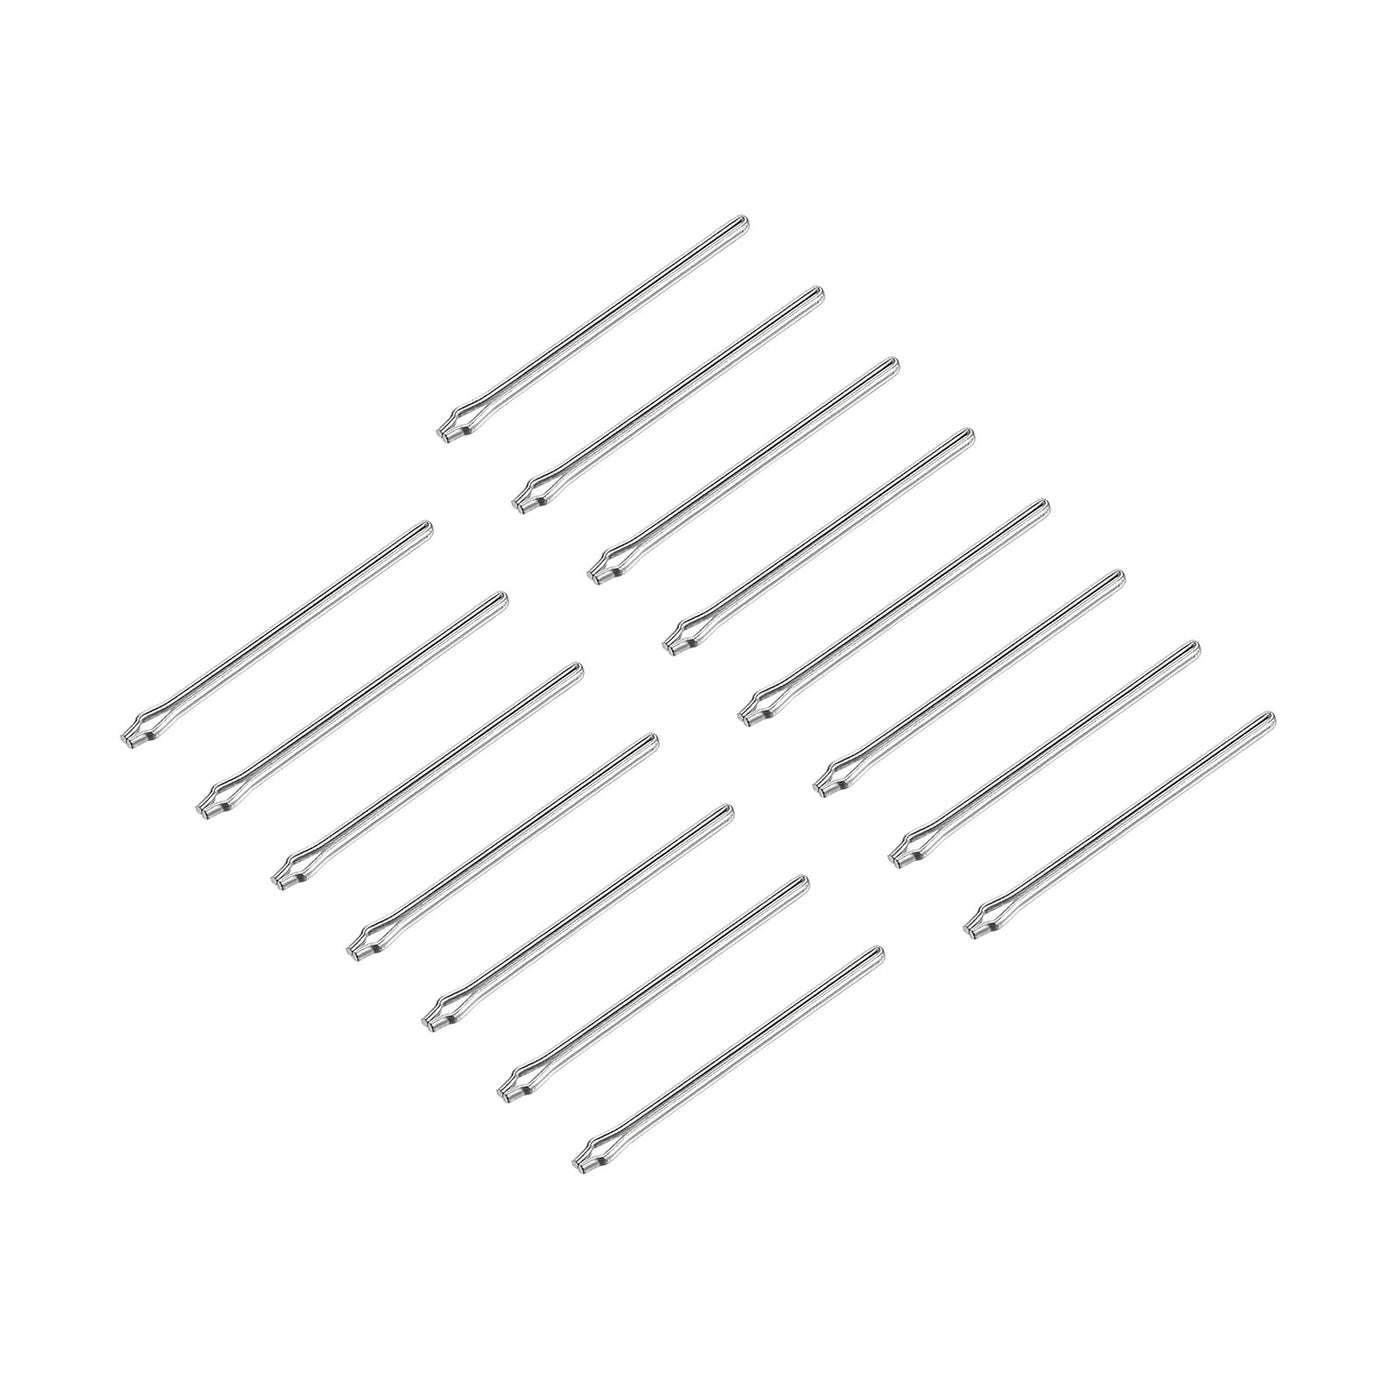 Uxcell Uxcell 15Pcs 9mm Watch Band Link Cotter Pin, Stainless Steel 1mm Dia. Silver Tone